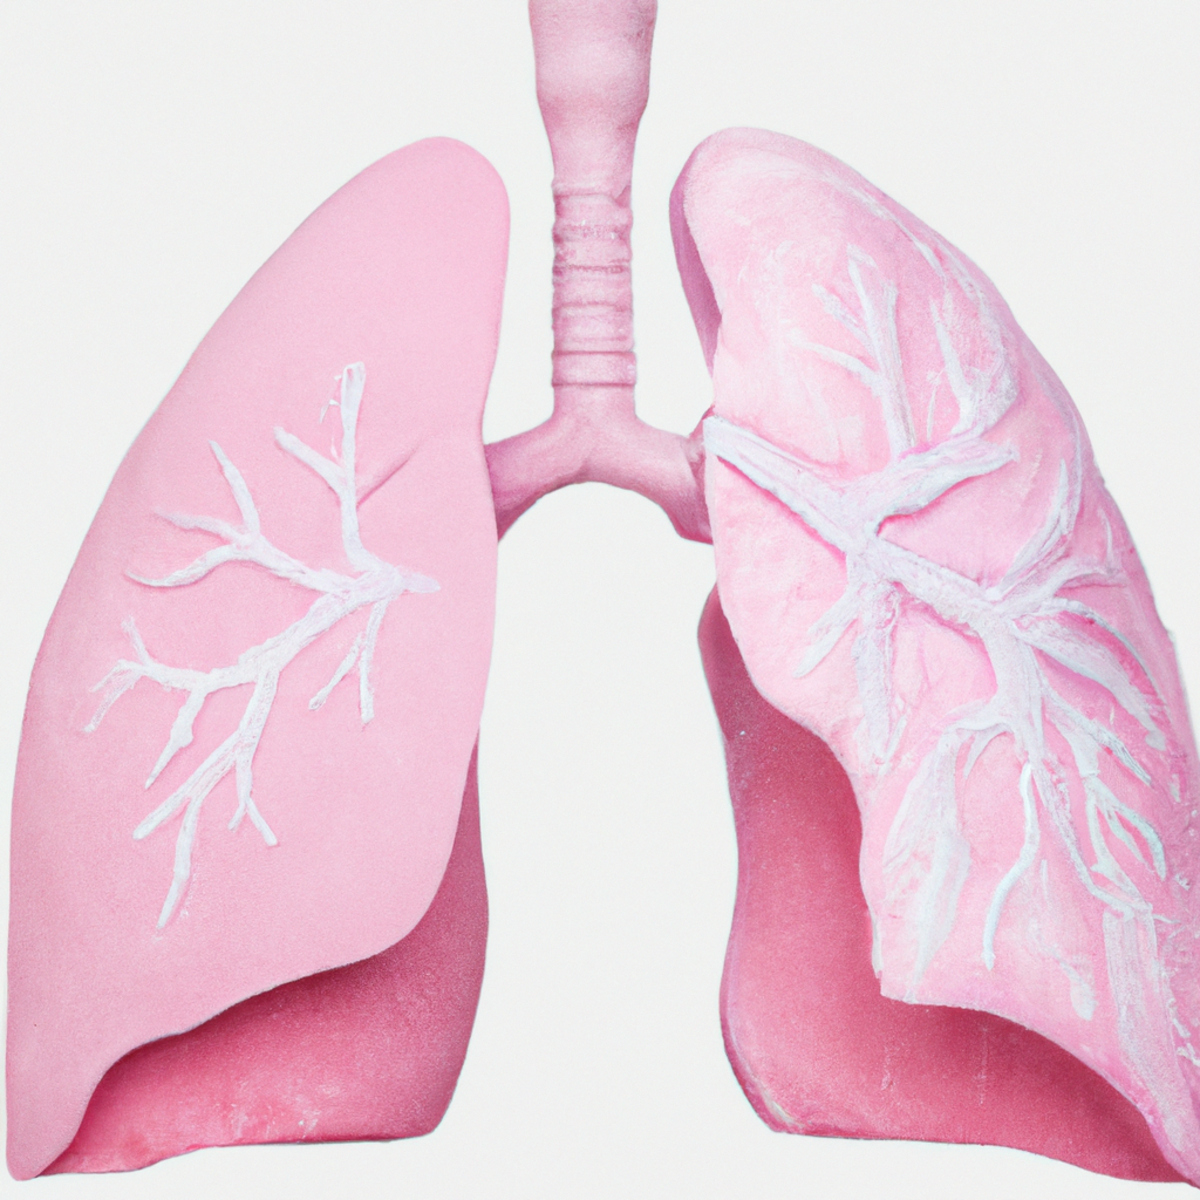 Detailed close-up of healthy human lungs, showcasing complex airways.